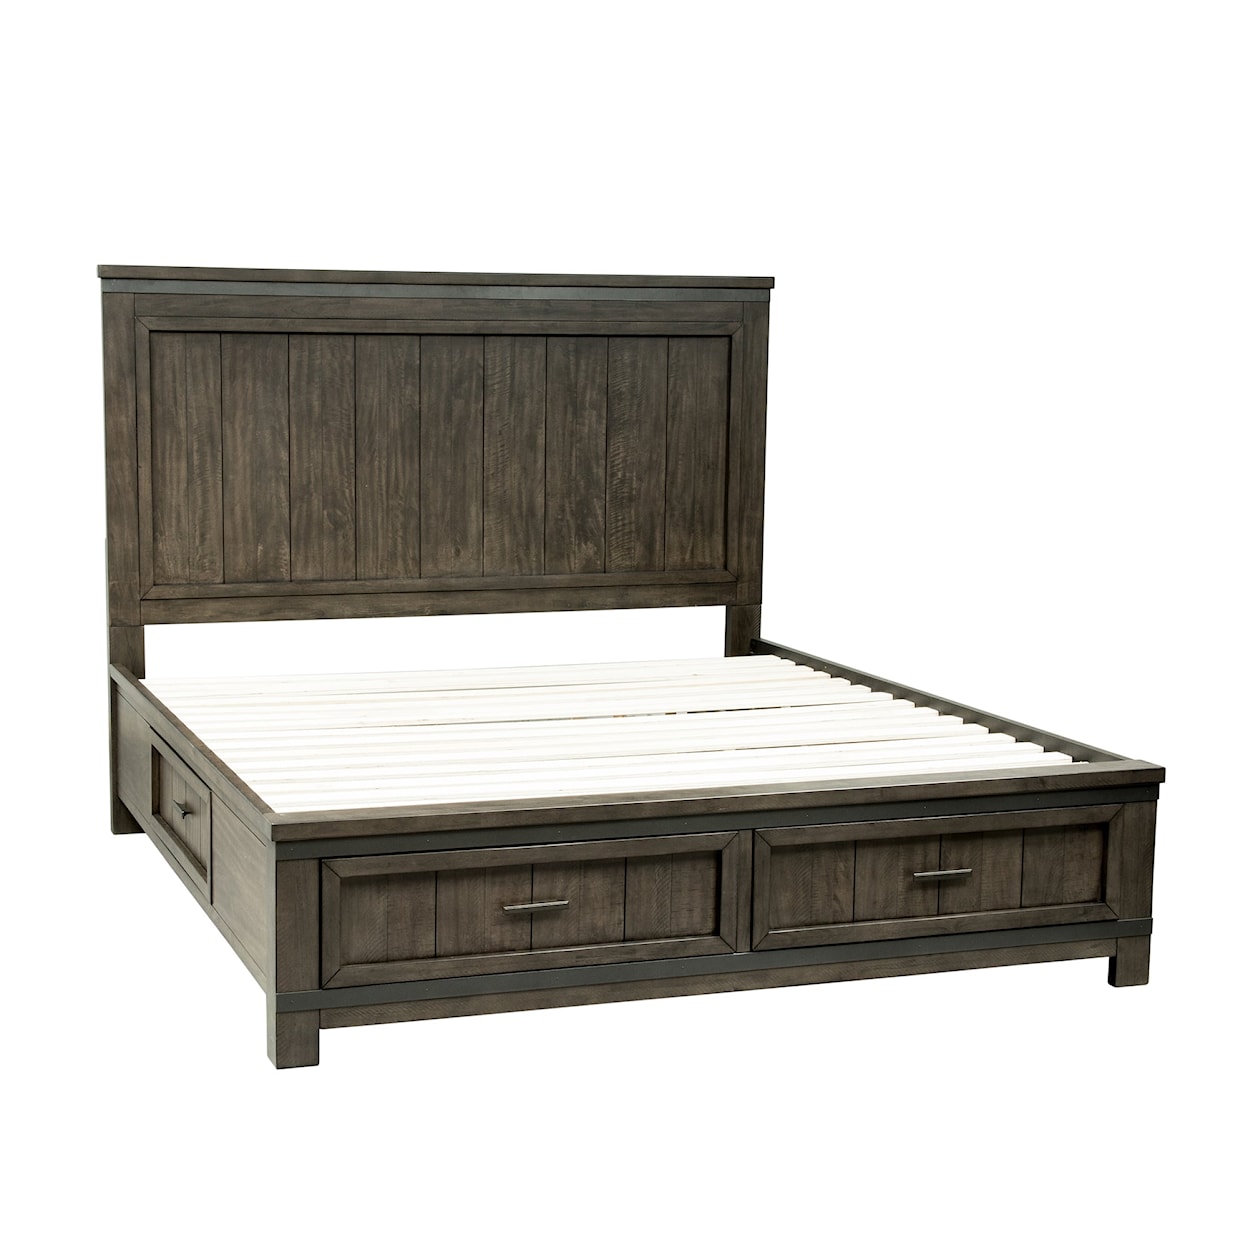 Liberty Furniture Thornwood Hills Two Sided Storage King Panel Bed